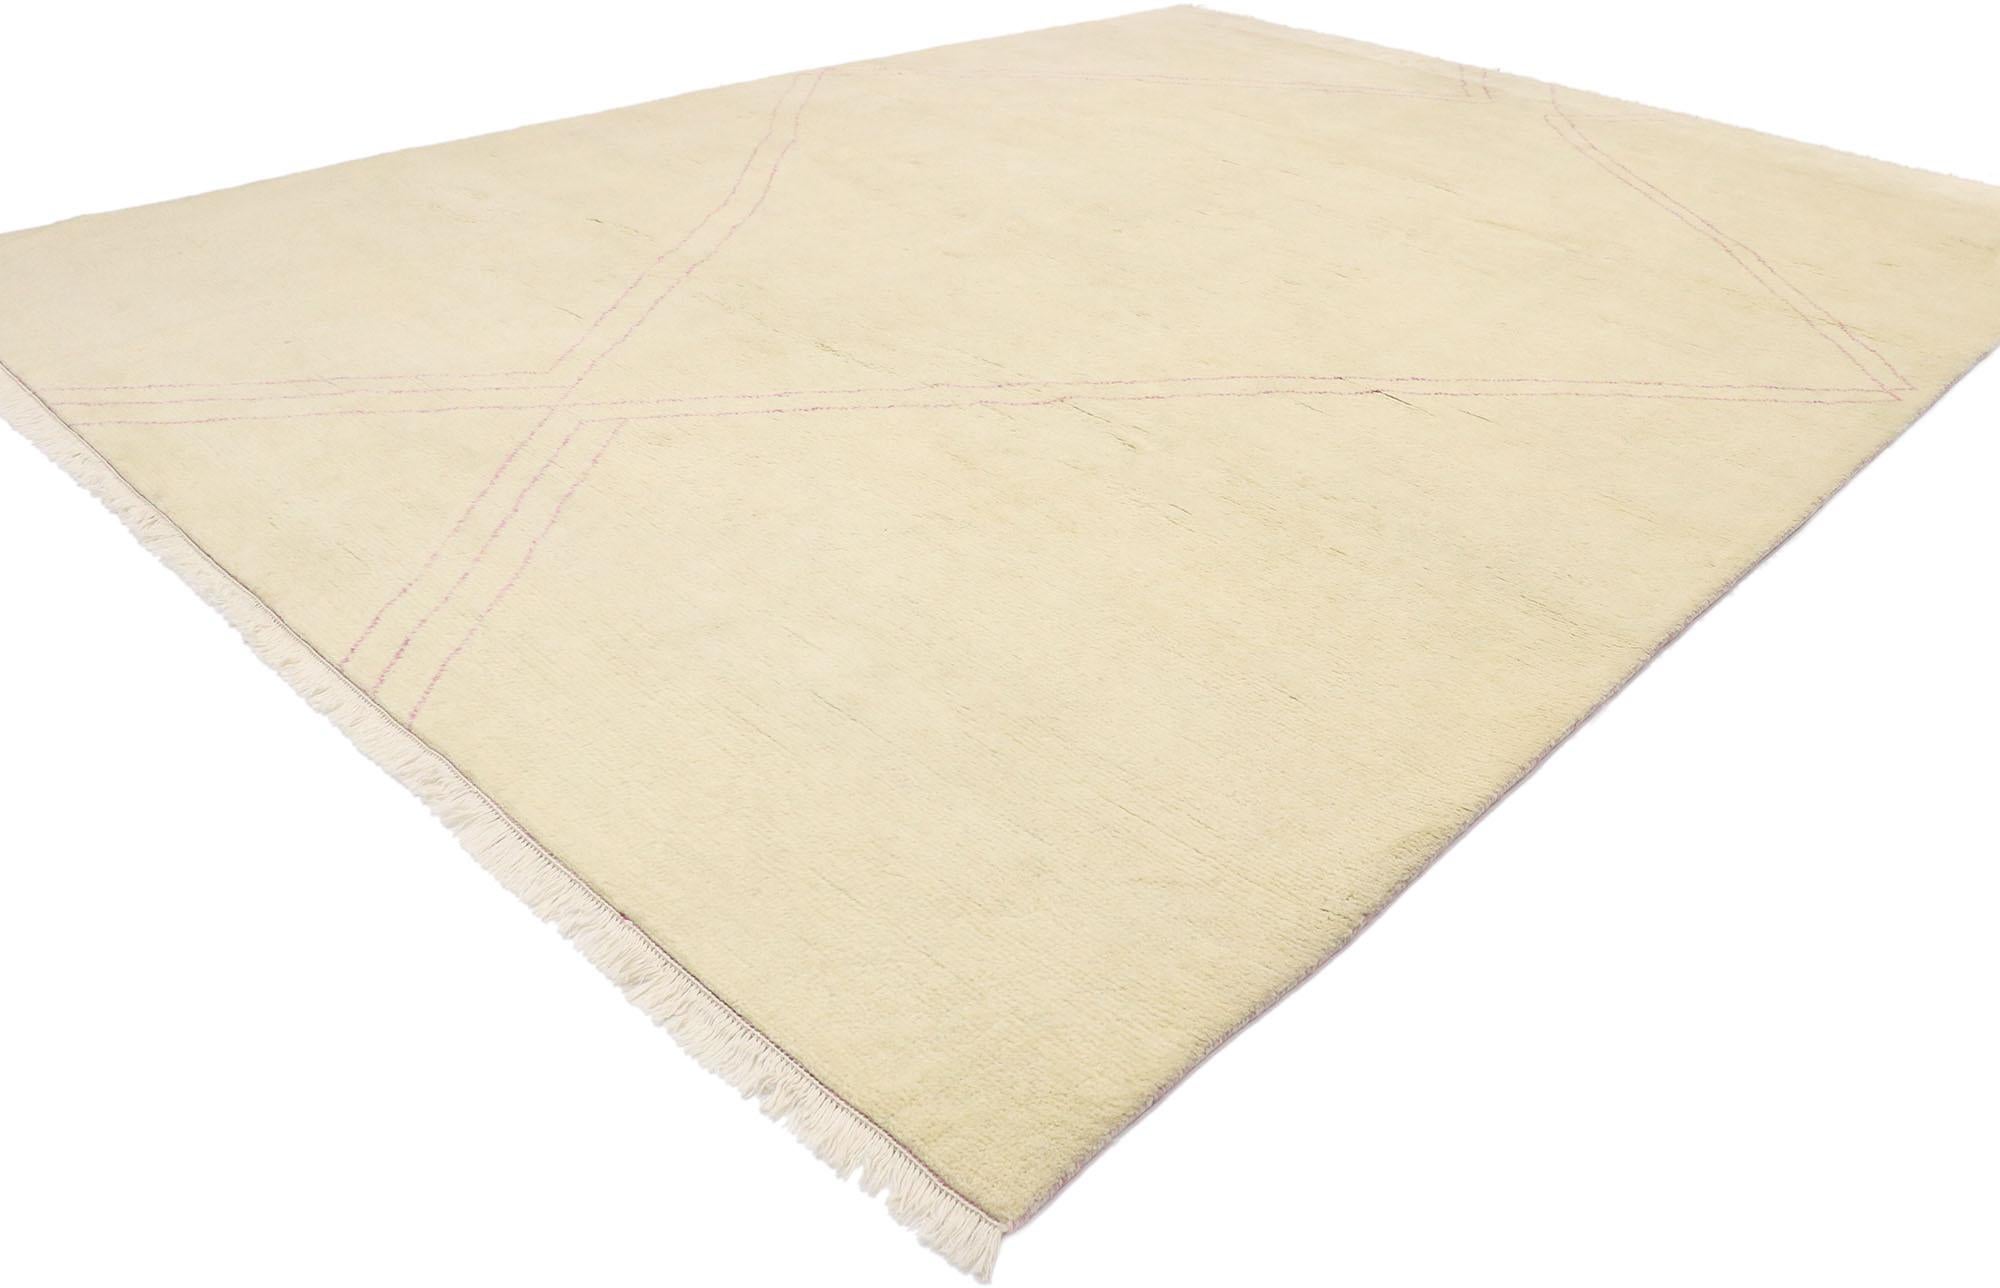 30527, new contemporary Moroccan style rug with minimalist bohemian style. This hand knotted wool contemporary Moroccan area rug features subtle pink lines running the length of the creamy beige backdrop. The whimsical lines criss cross in an